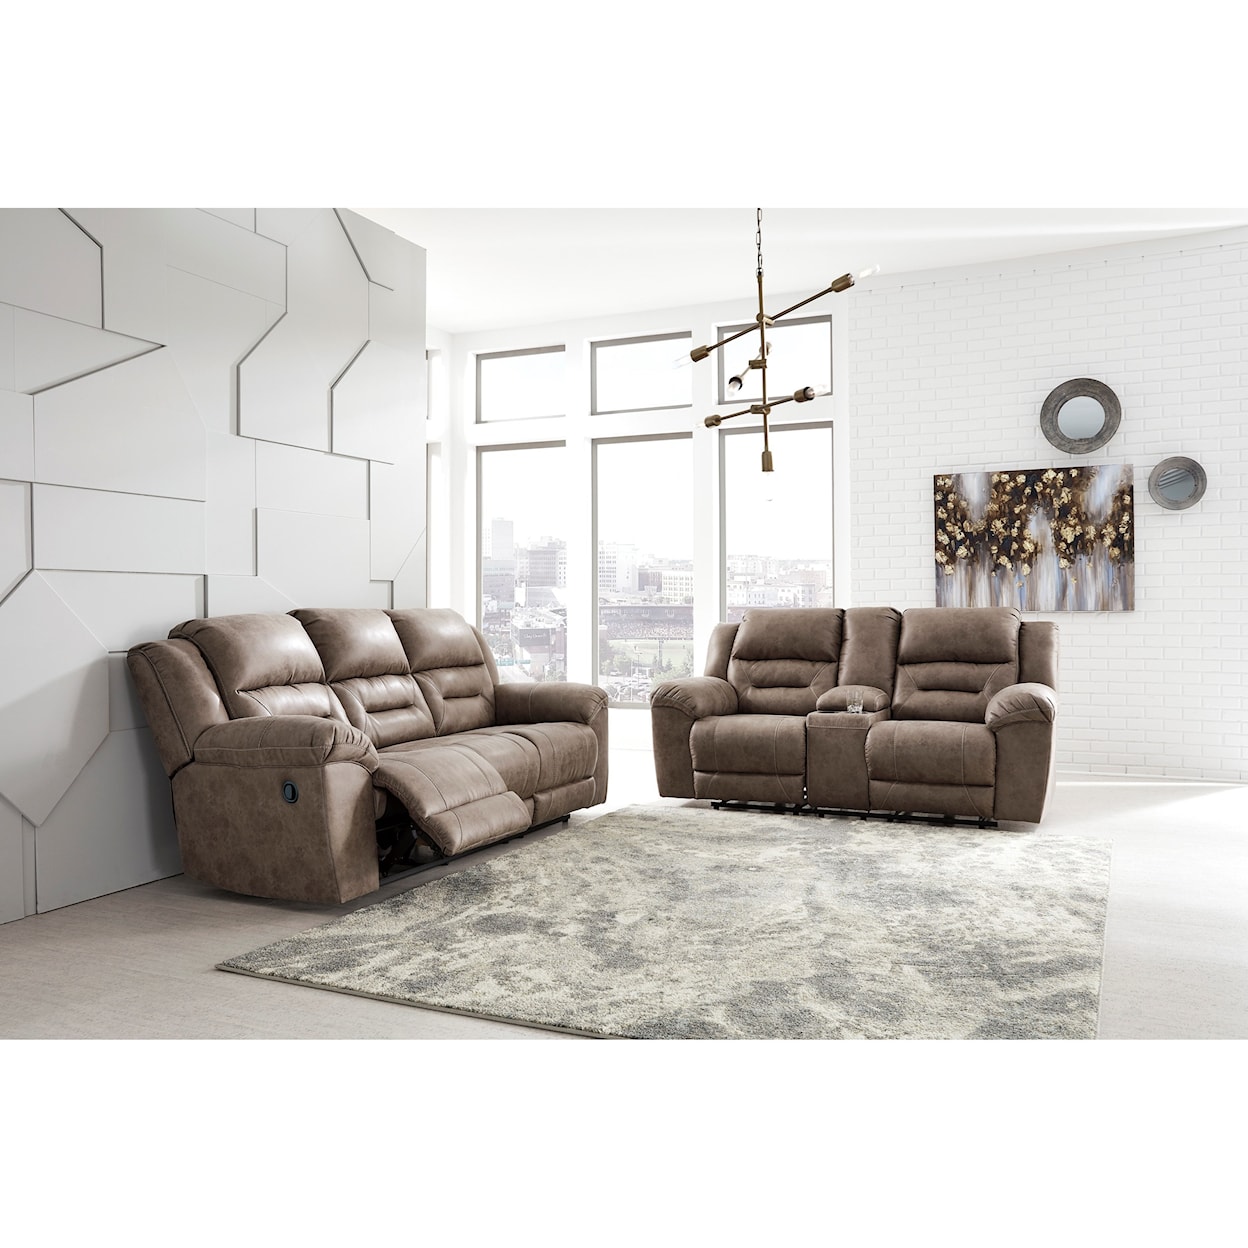 Benchcraft Stoneland Reclining Living Room Group